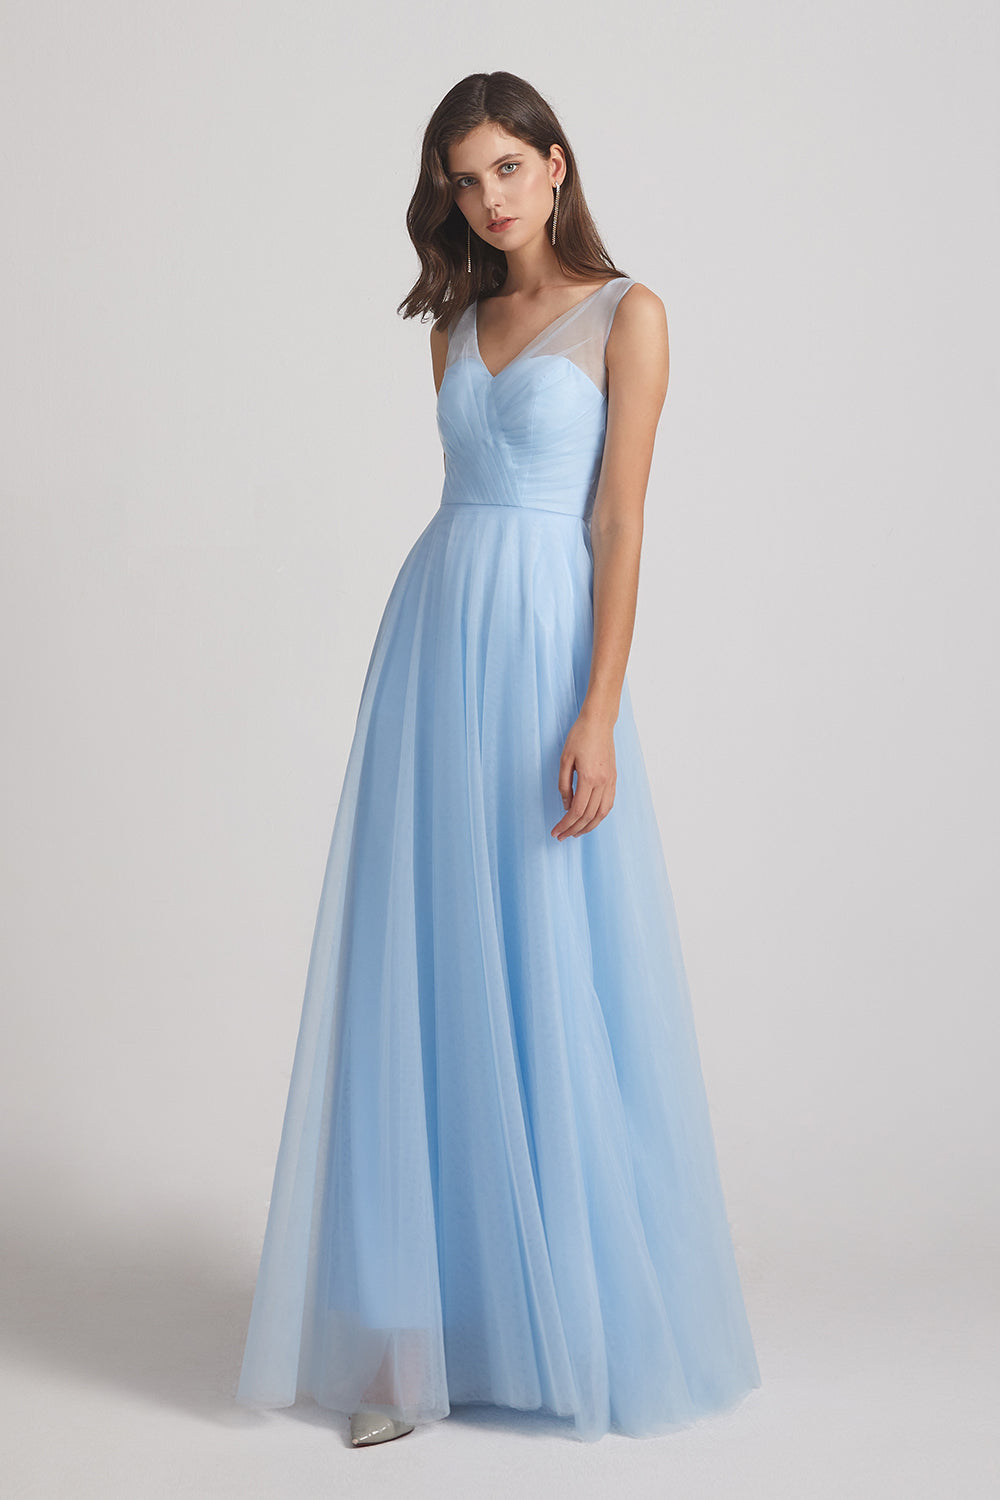 Light Blue Bridesmaid Gowns